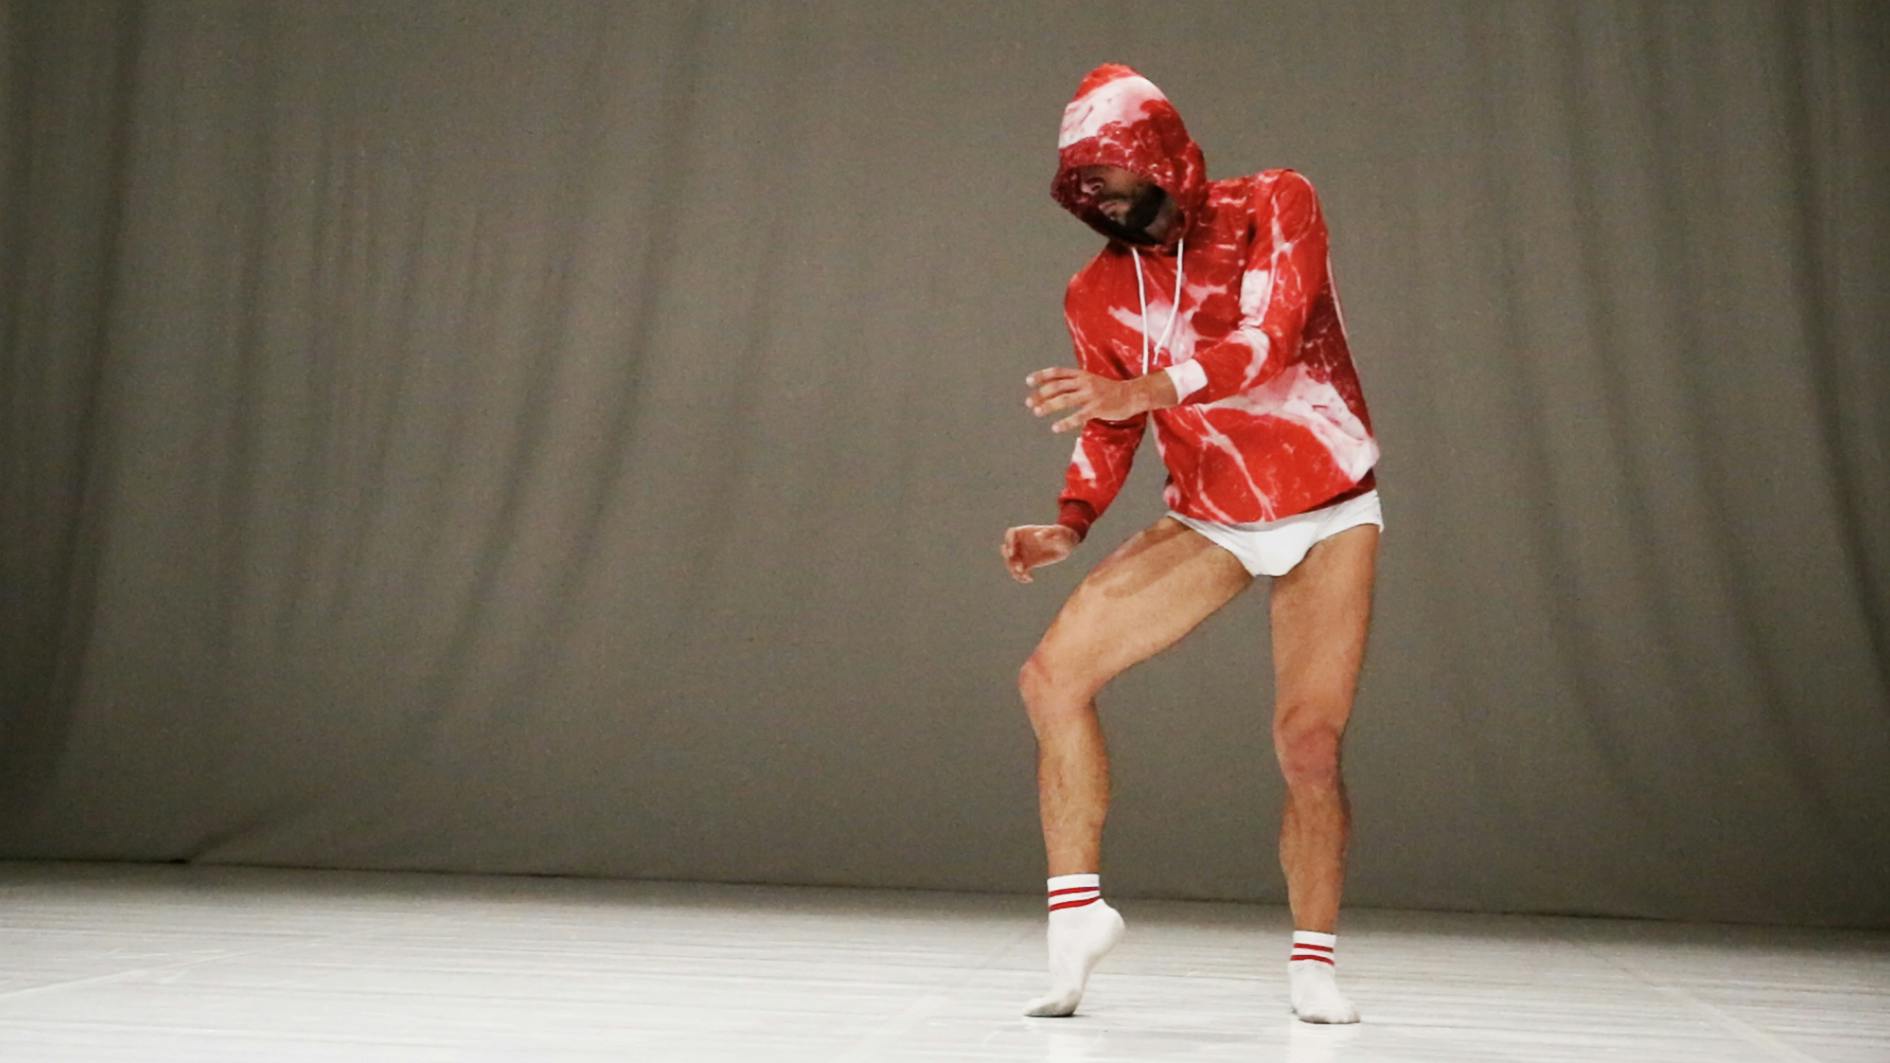 Dancer Carlo Massari posing in a red and white sweatshirt, the hood covers his face